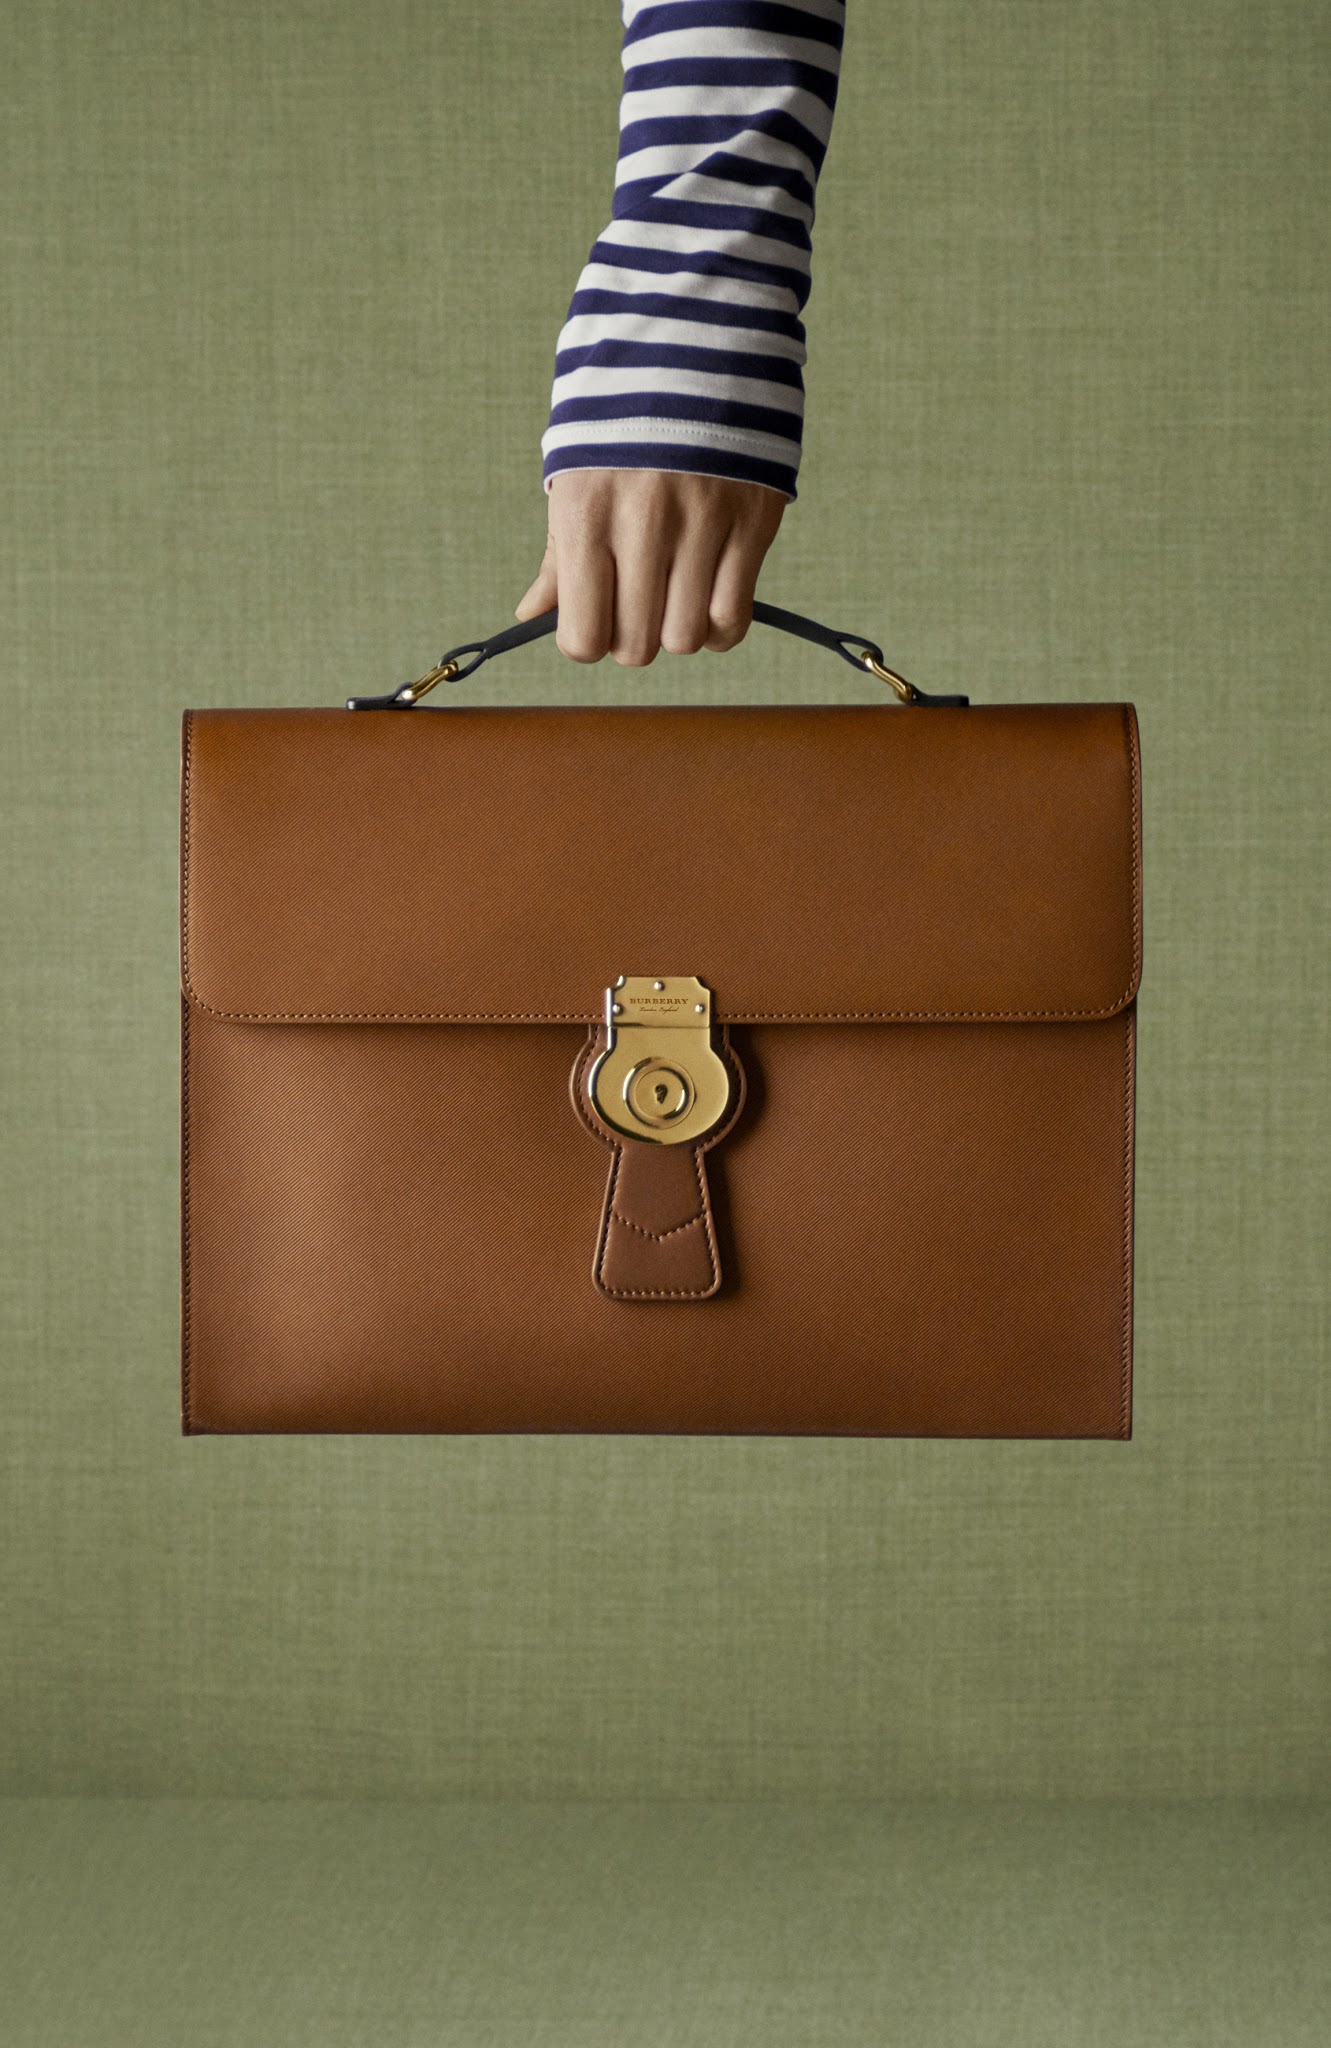 Father's Day Gift Ideas From Burberry